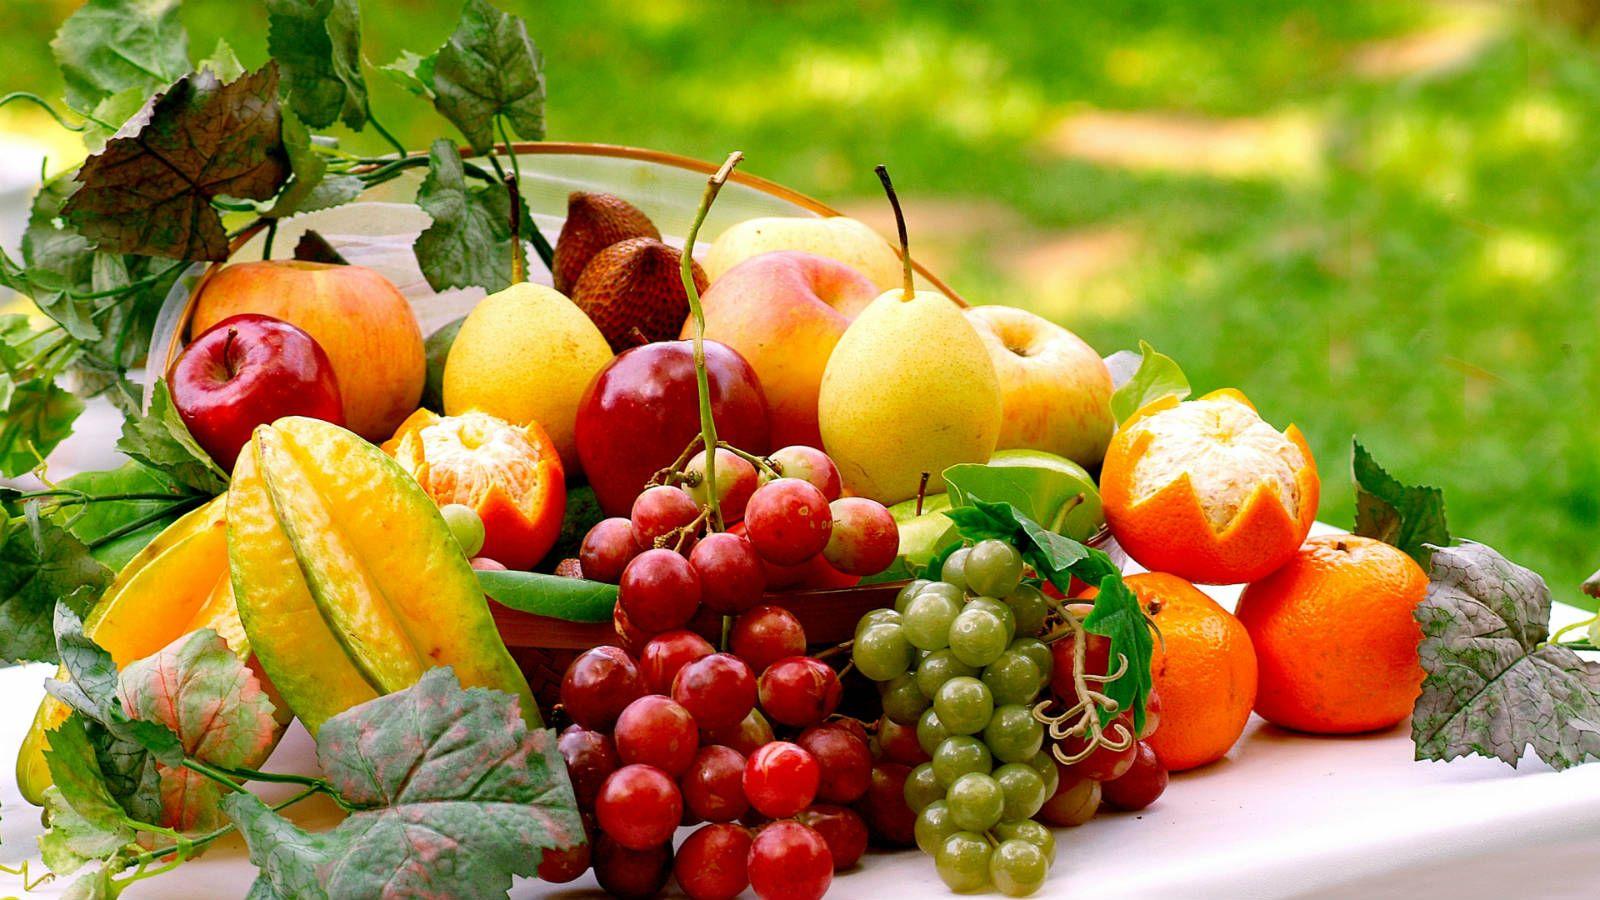 Vegetable And Fruits Wallpaper